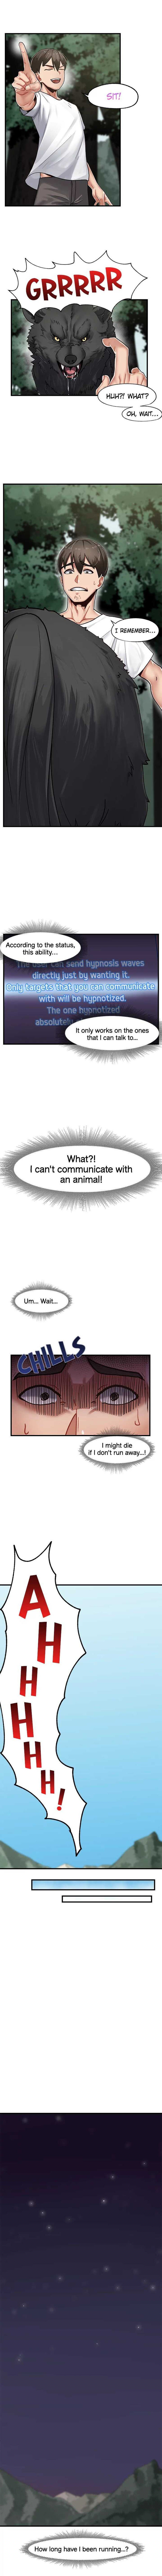 [KAMADI, OneDollar, Grilled Mero] Absolute Hypnosis in Another World (1-23) [English] [Ongoing] - Page 11